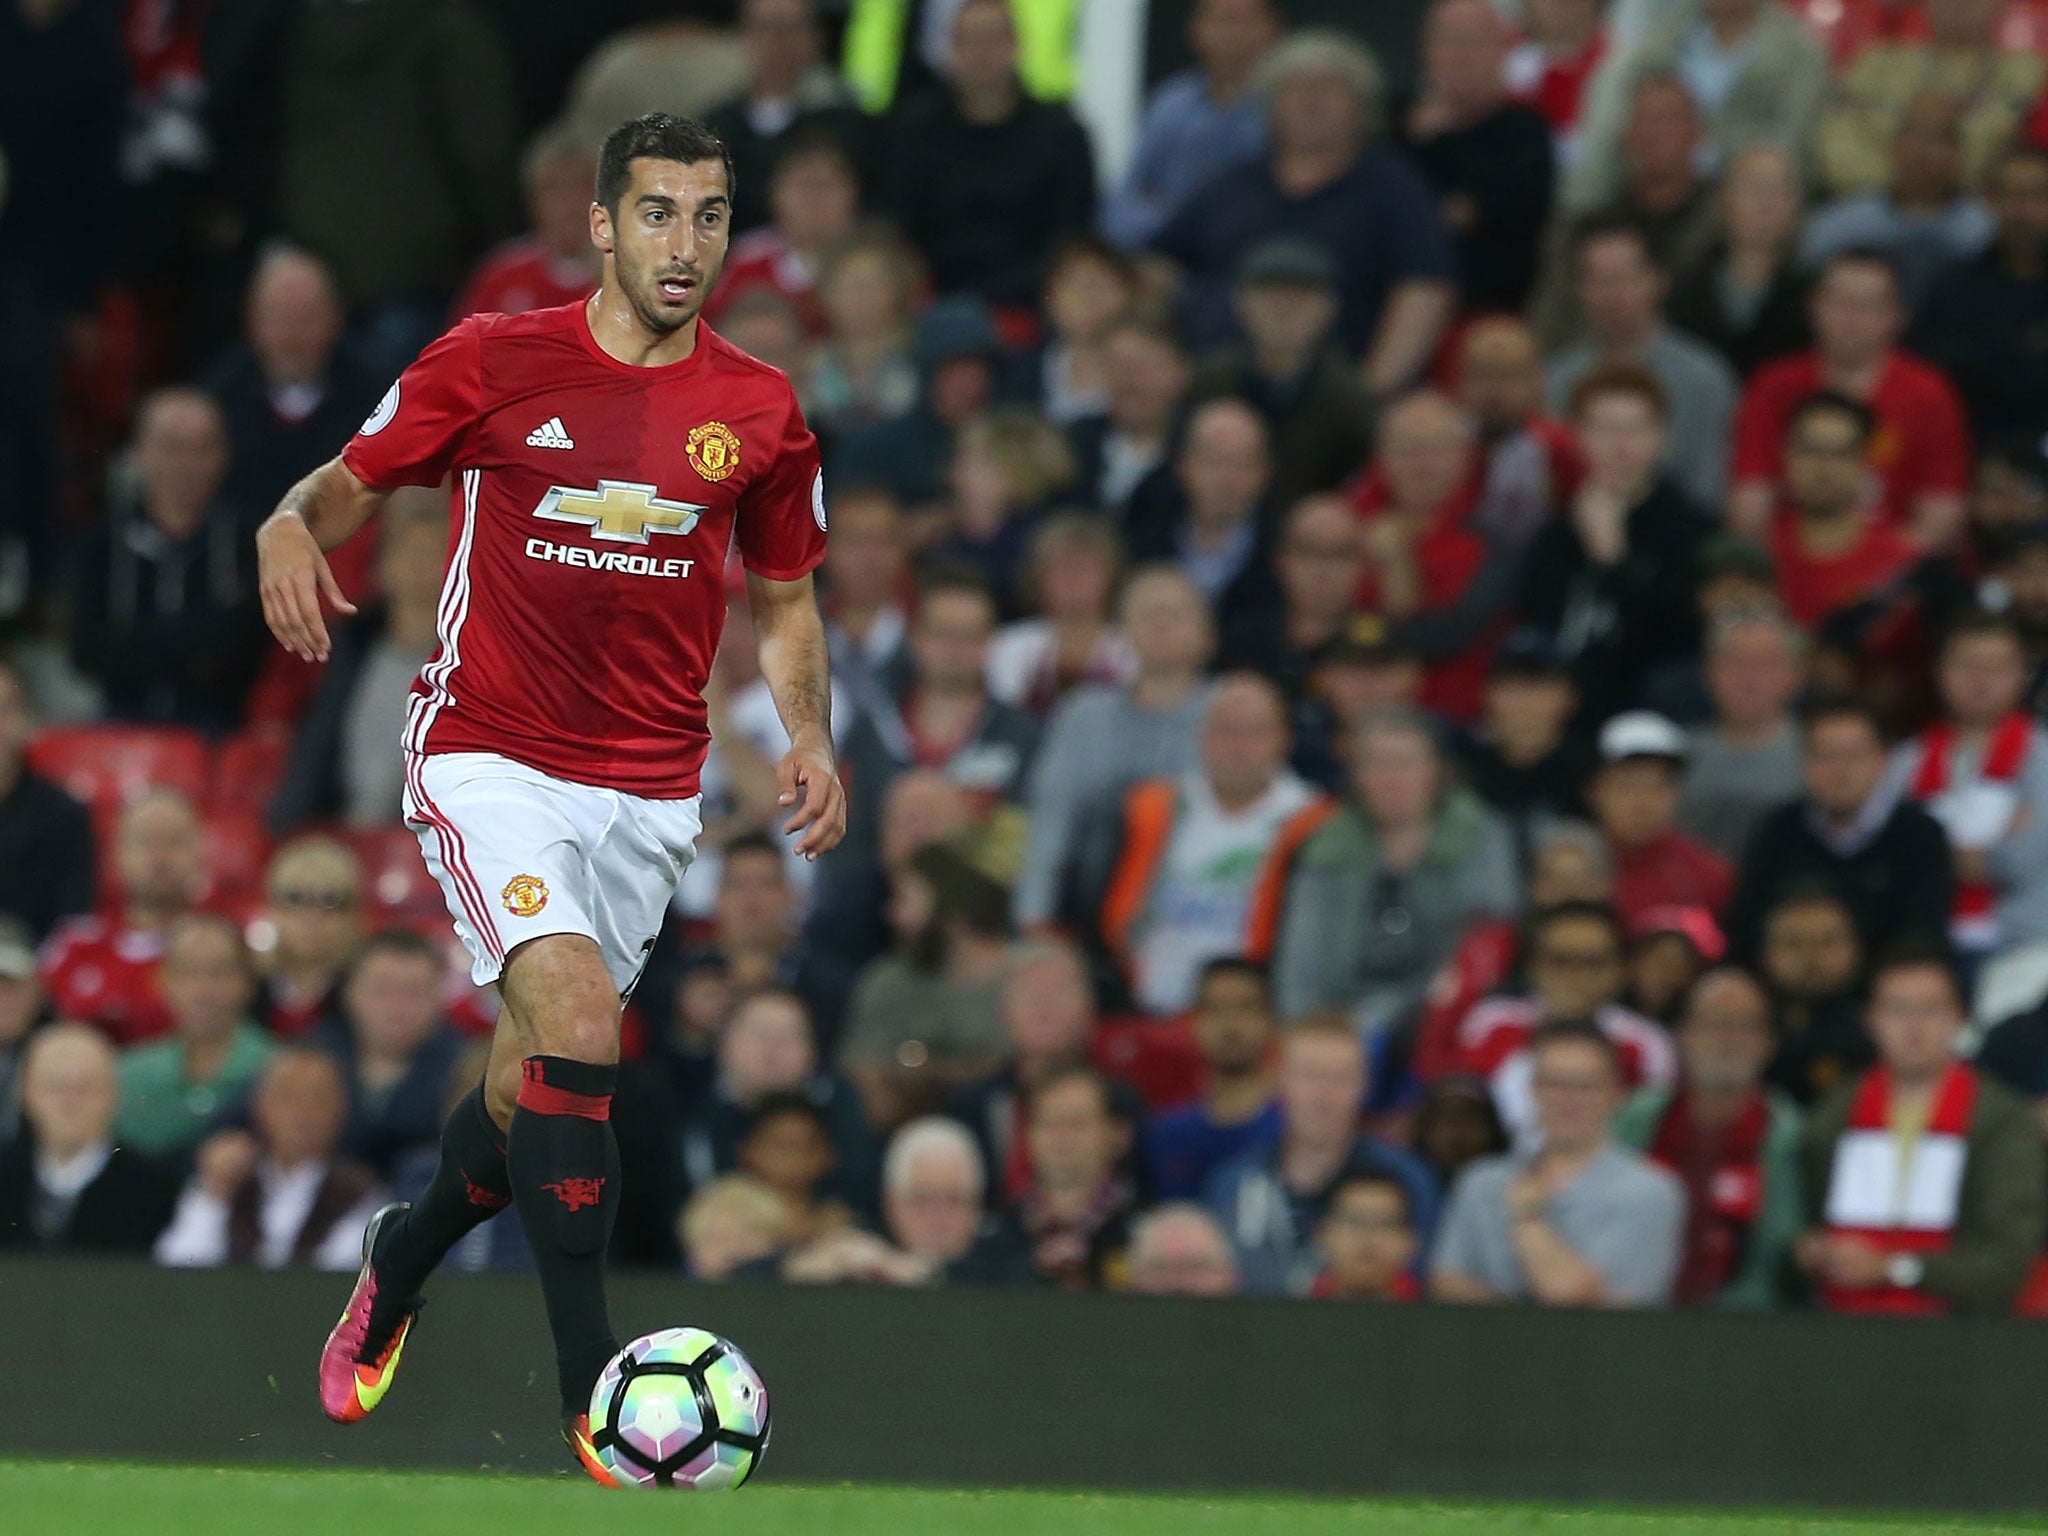 Henrikh Mkhitaryan is expected to be out for Monday's game